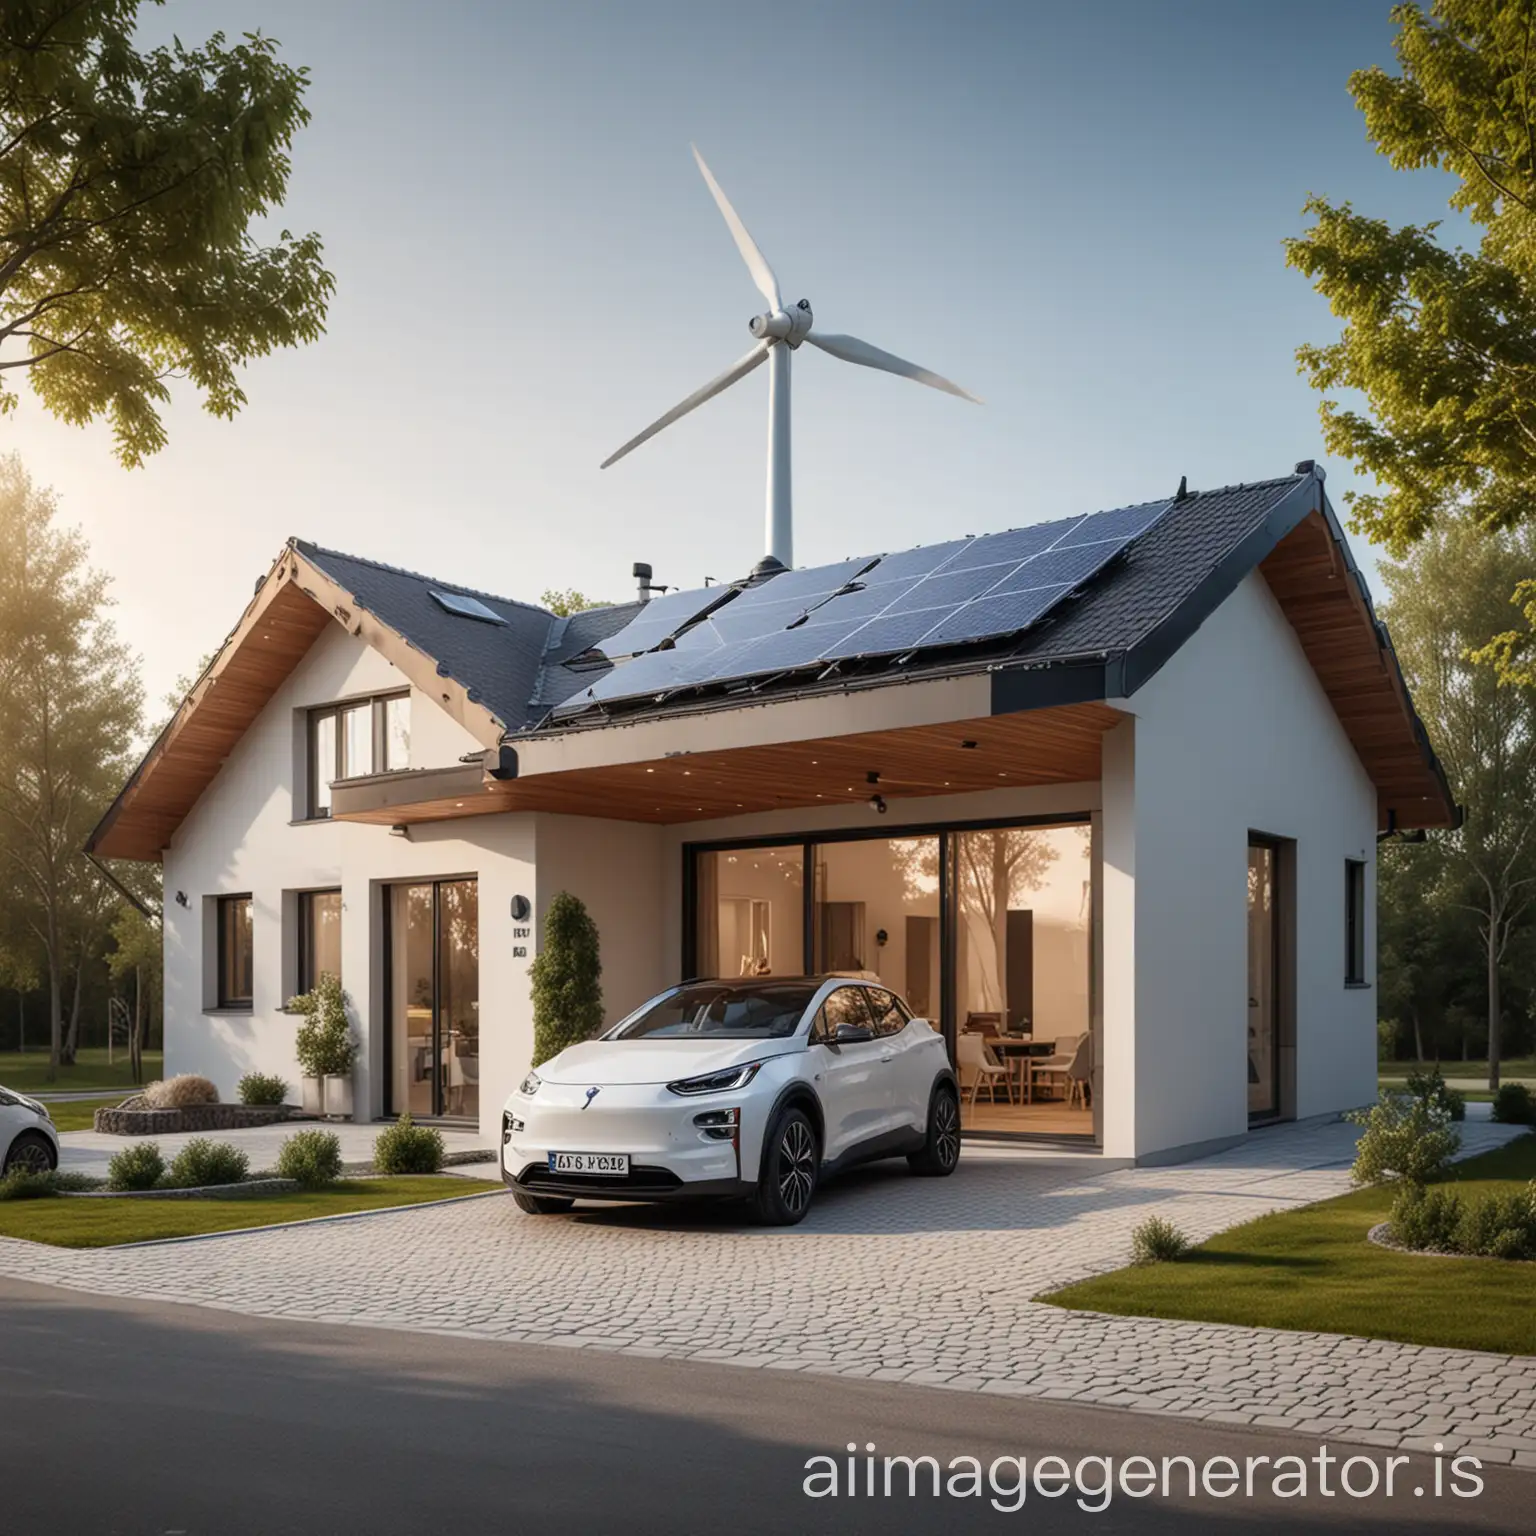 modern serene home with an installed small wind turbine, eco-friendly environment with an electric vehicle parked in front of the house